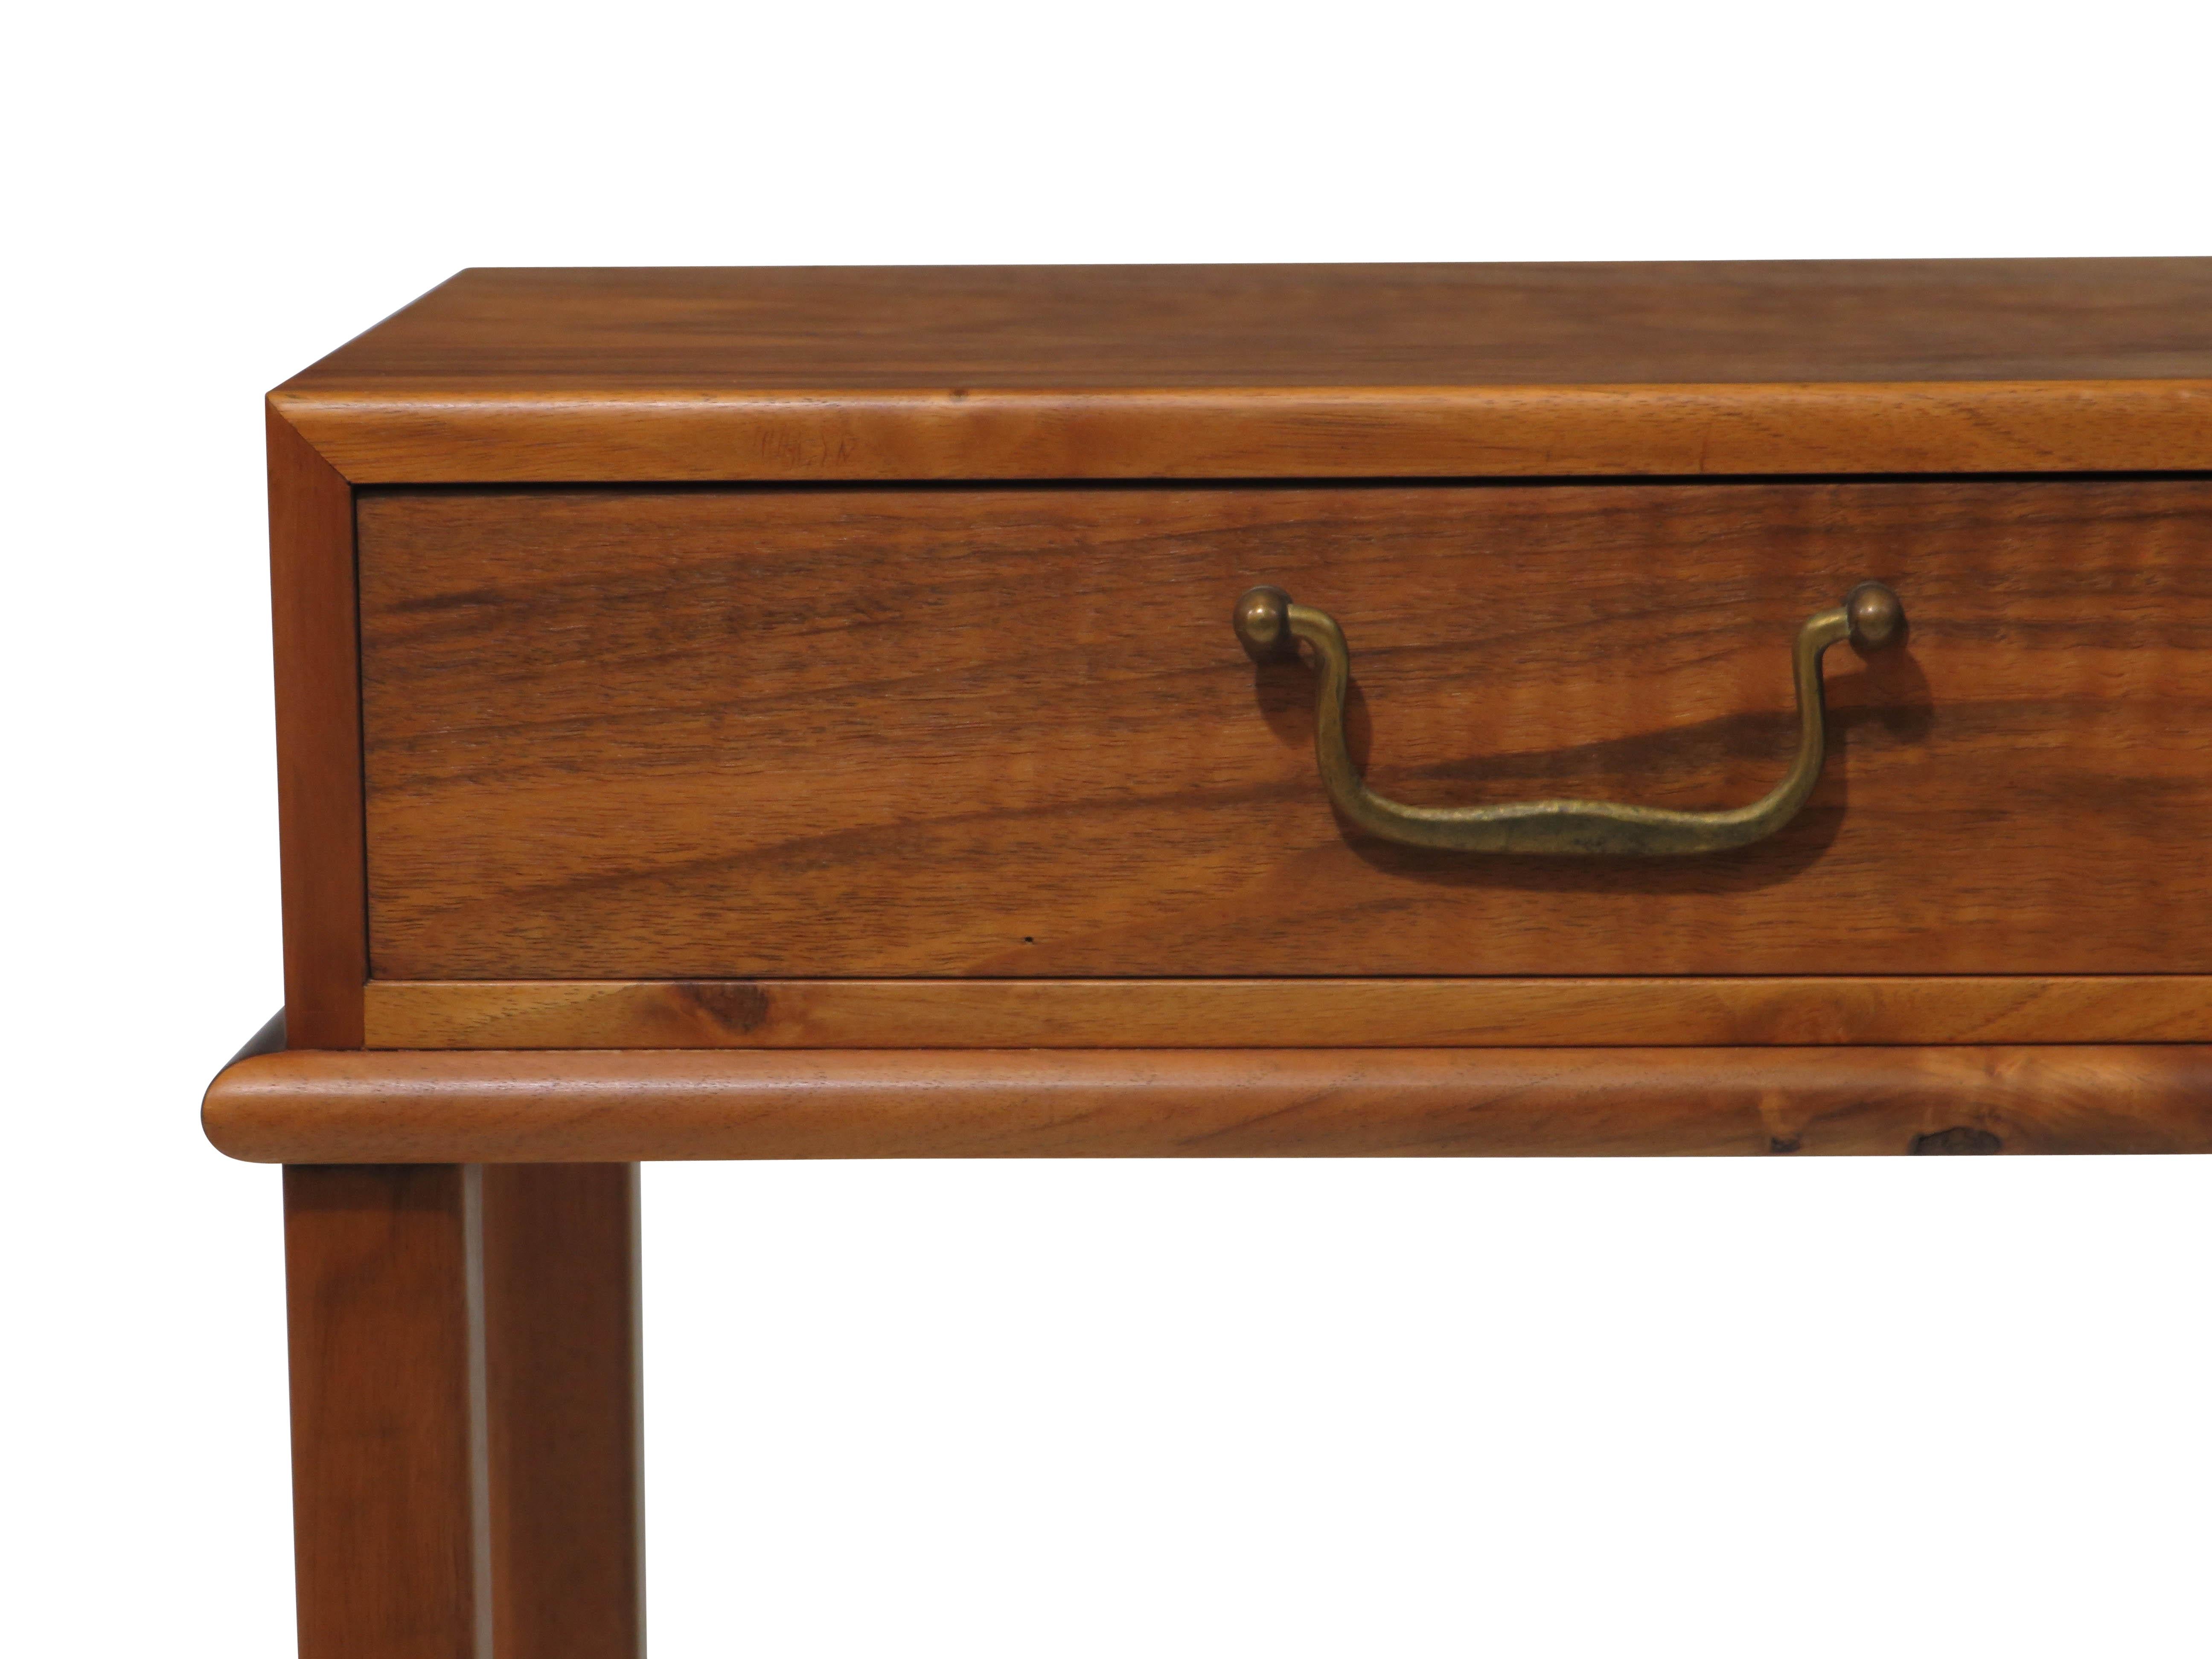 1930's Burled walnut nightstand by Danish cabinetmaker Frederik Staermose.
Handcrafted of figured walnut with mitered corners and traditional brass pull, raised solid walnut legs with cross stretchers.
Finely restored and in excellent condition.